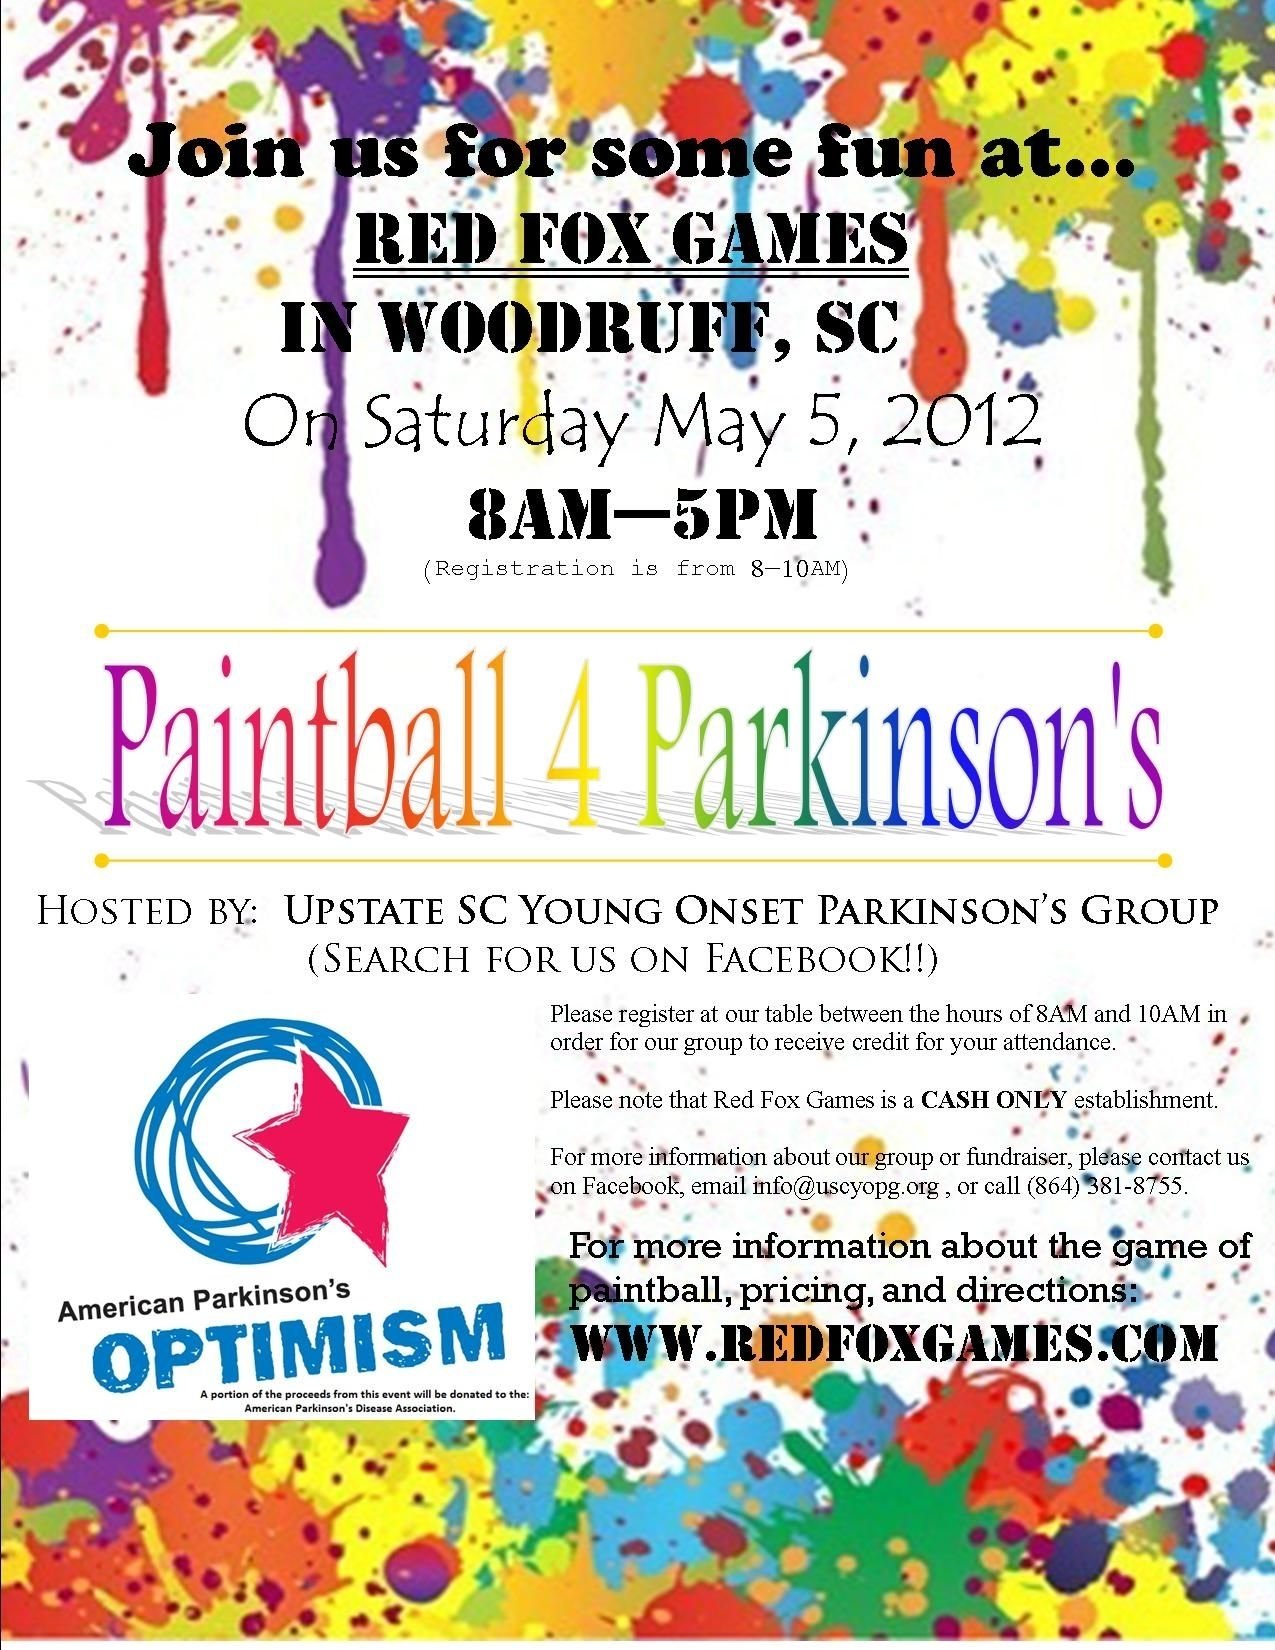 10 Nice Fundraising Ideas For Small Groups paintball 4 parkinsons fundraise for the causes you care about at 2022